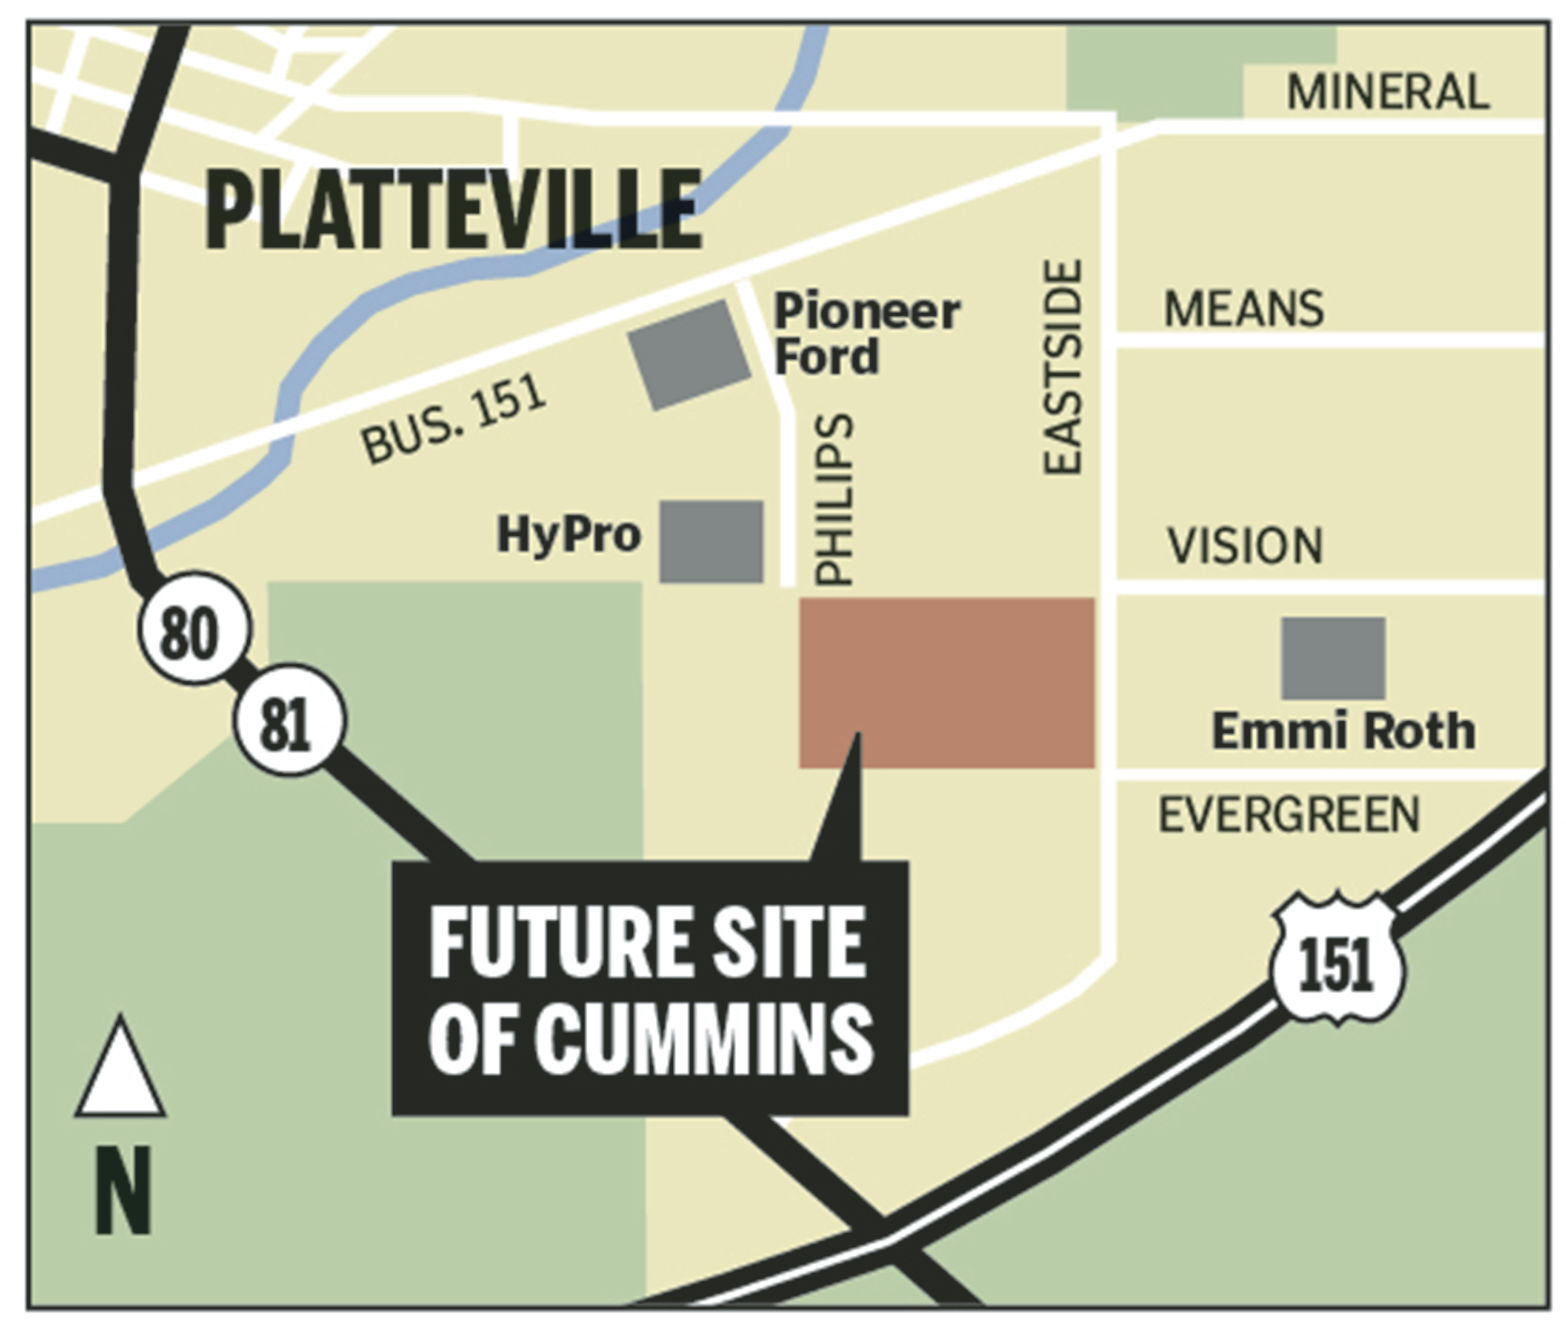 Cummins plans to construct a 342,000-square-foot building on Eastside Road in Platteville. PHOTO CREDIT: Mike Day